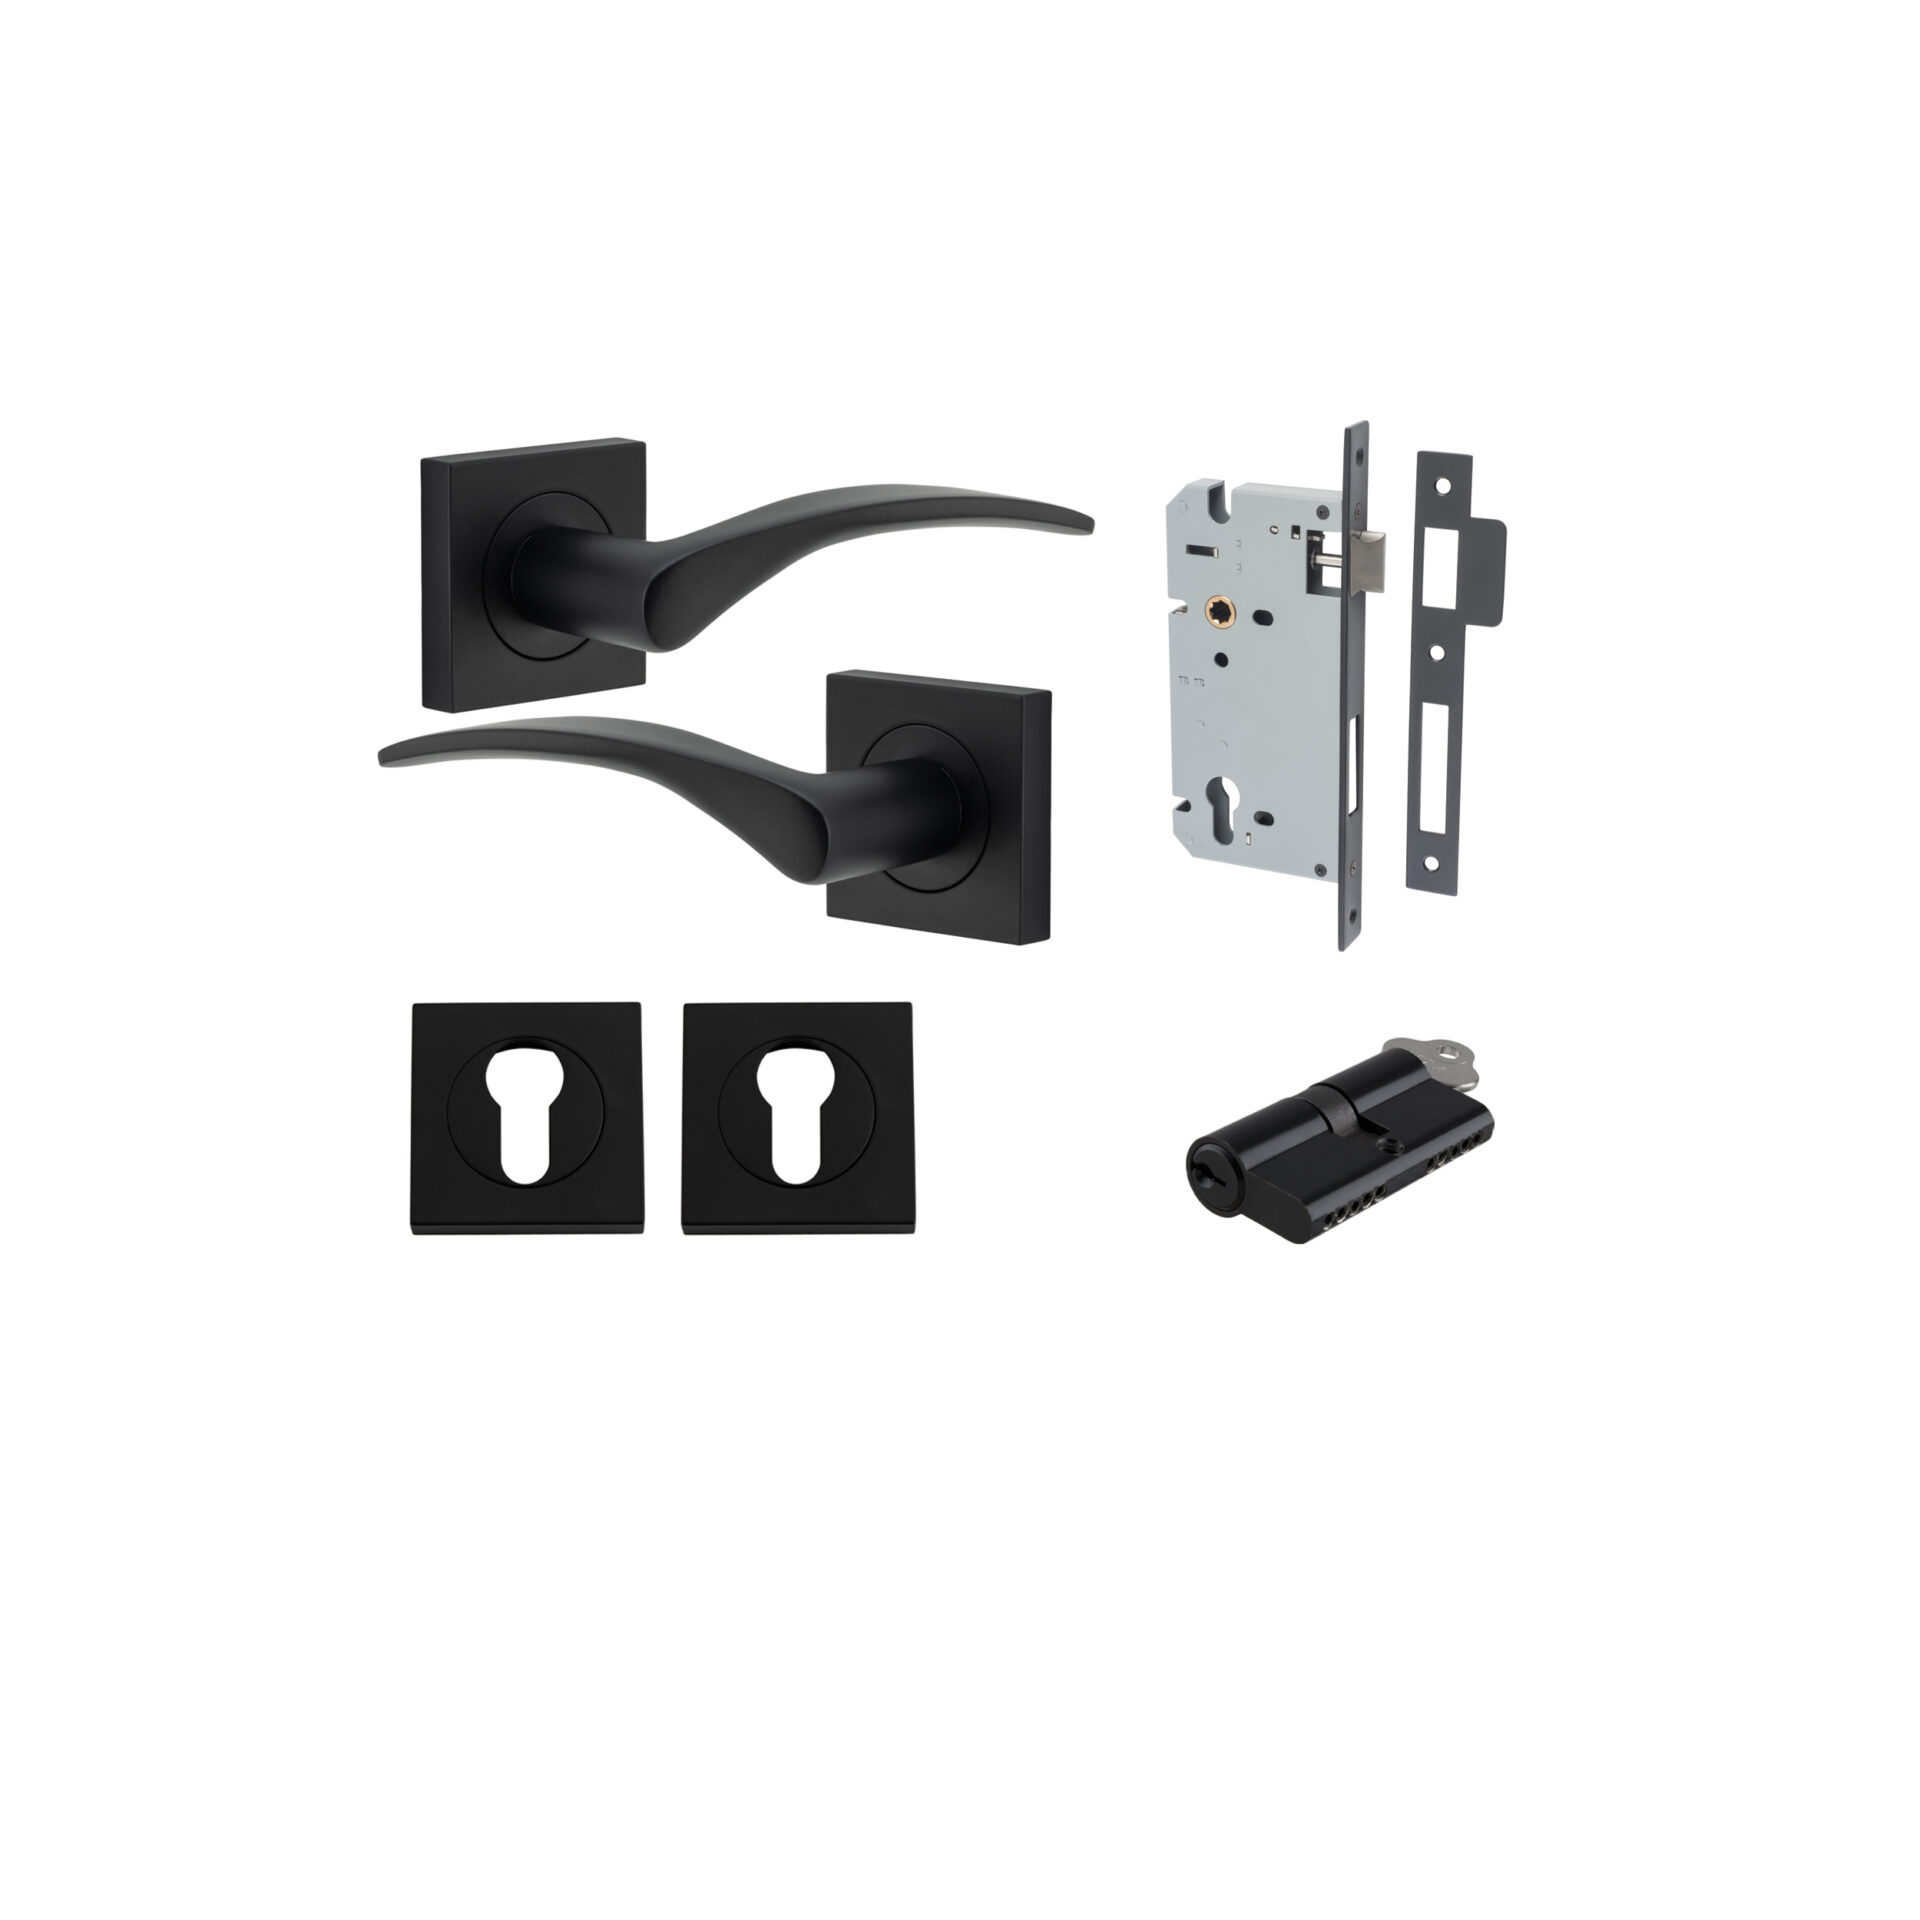 Oxford Lever - Square Rose Entrance Kit with Separate High Security Lock